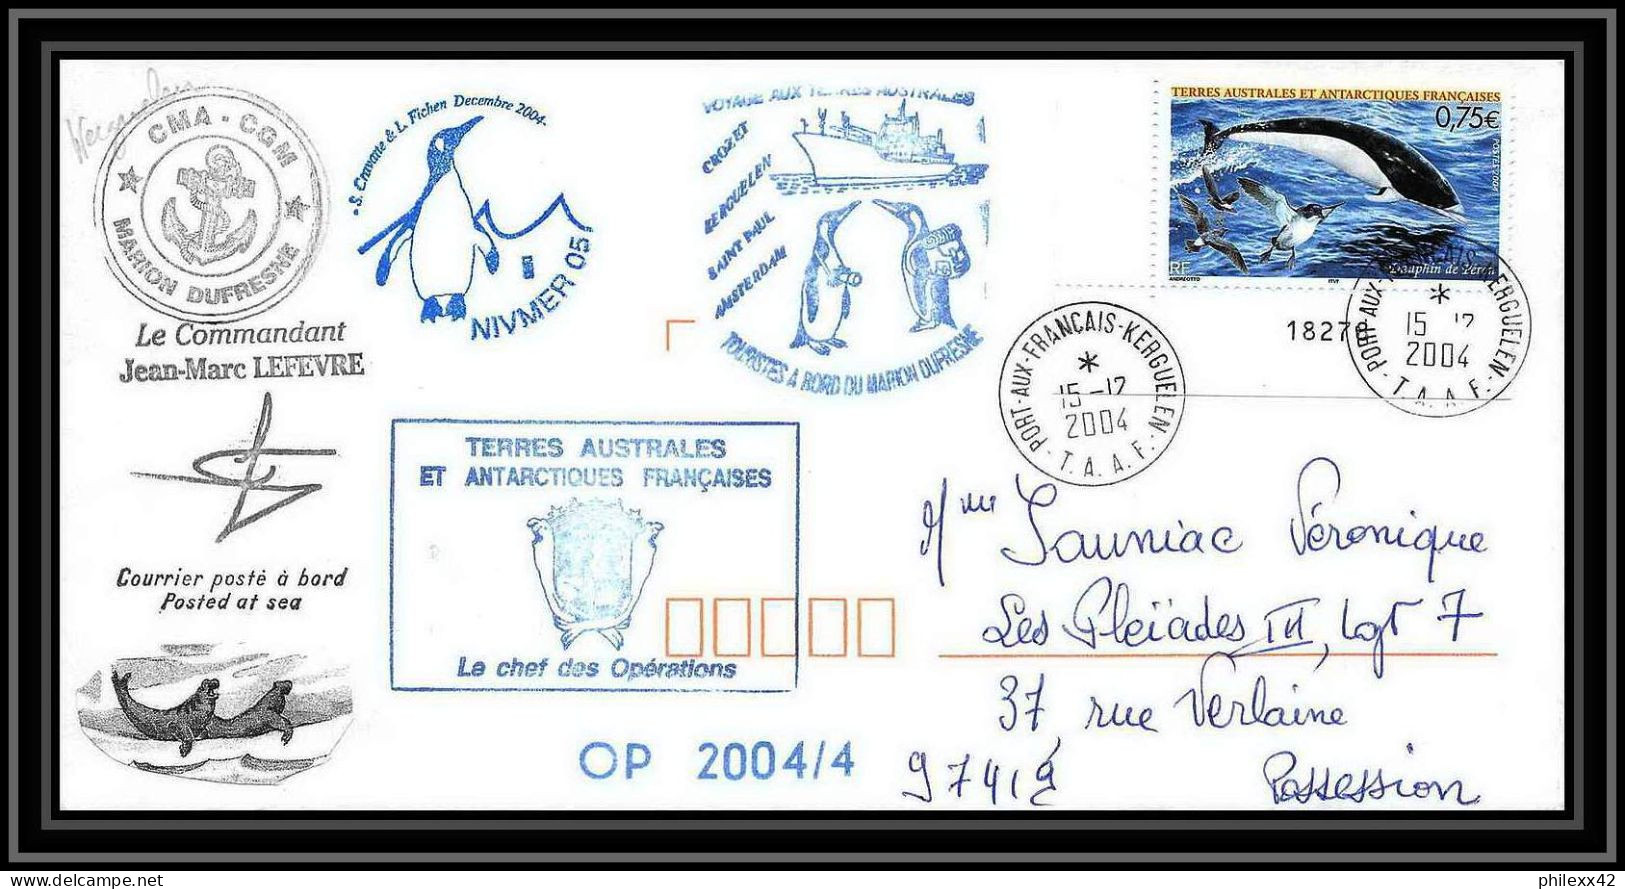 2477 ANTARCTIC Terres Australes TAAF Lettre Cover Dufresne 2 Signé Signed OP 2004/4 N°385 Possession Reunion Dauphin - Spedizioni Antartiche